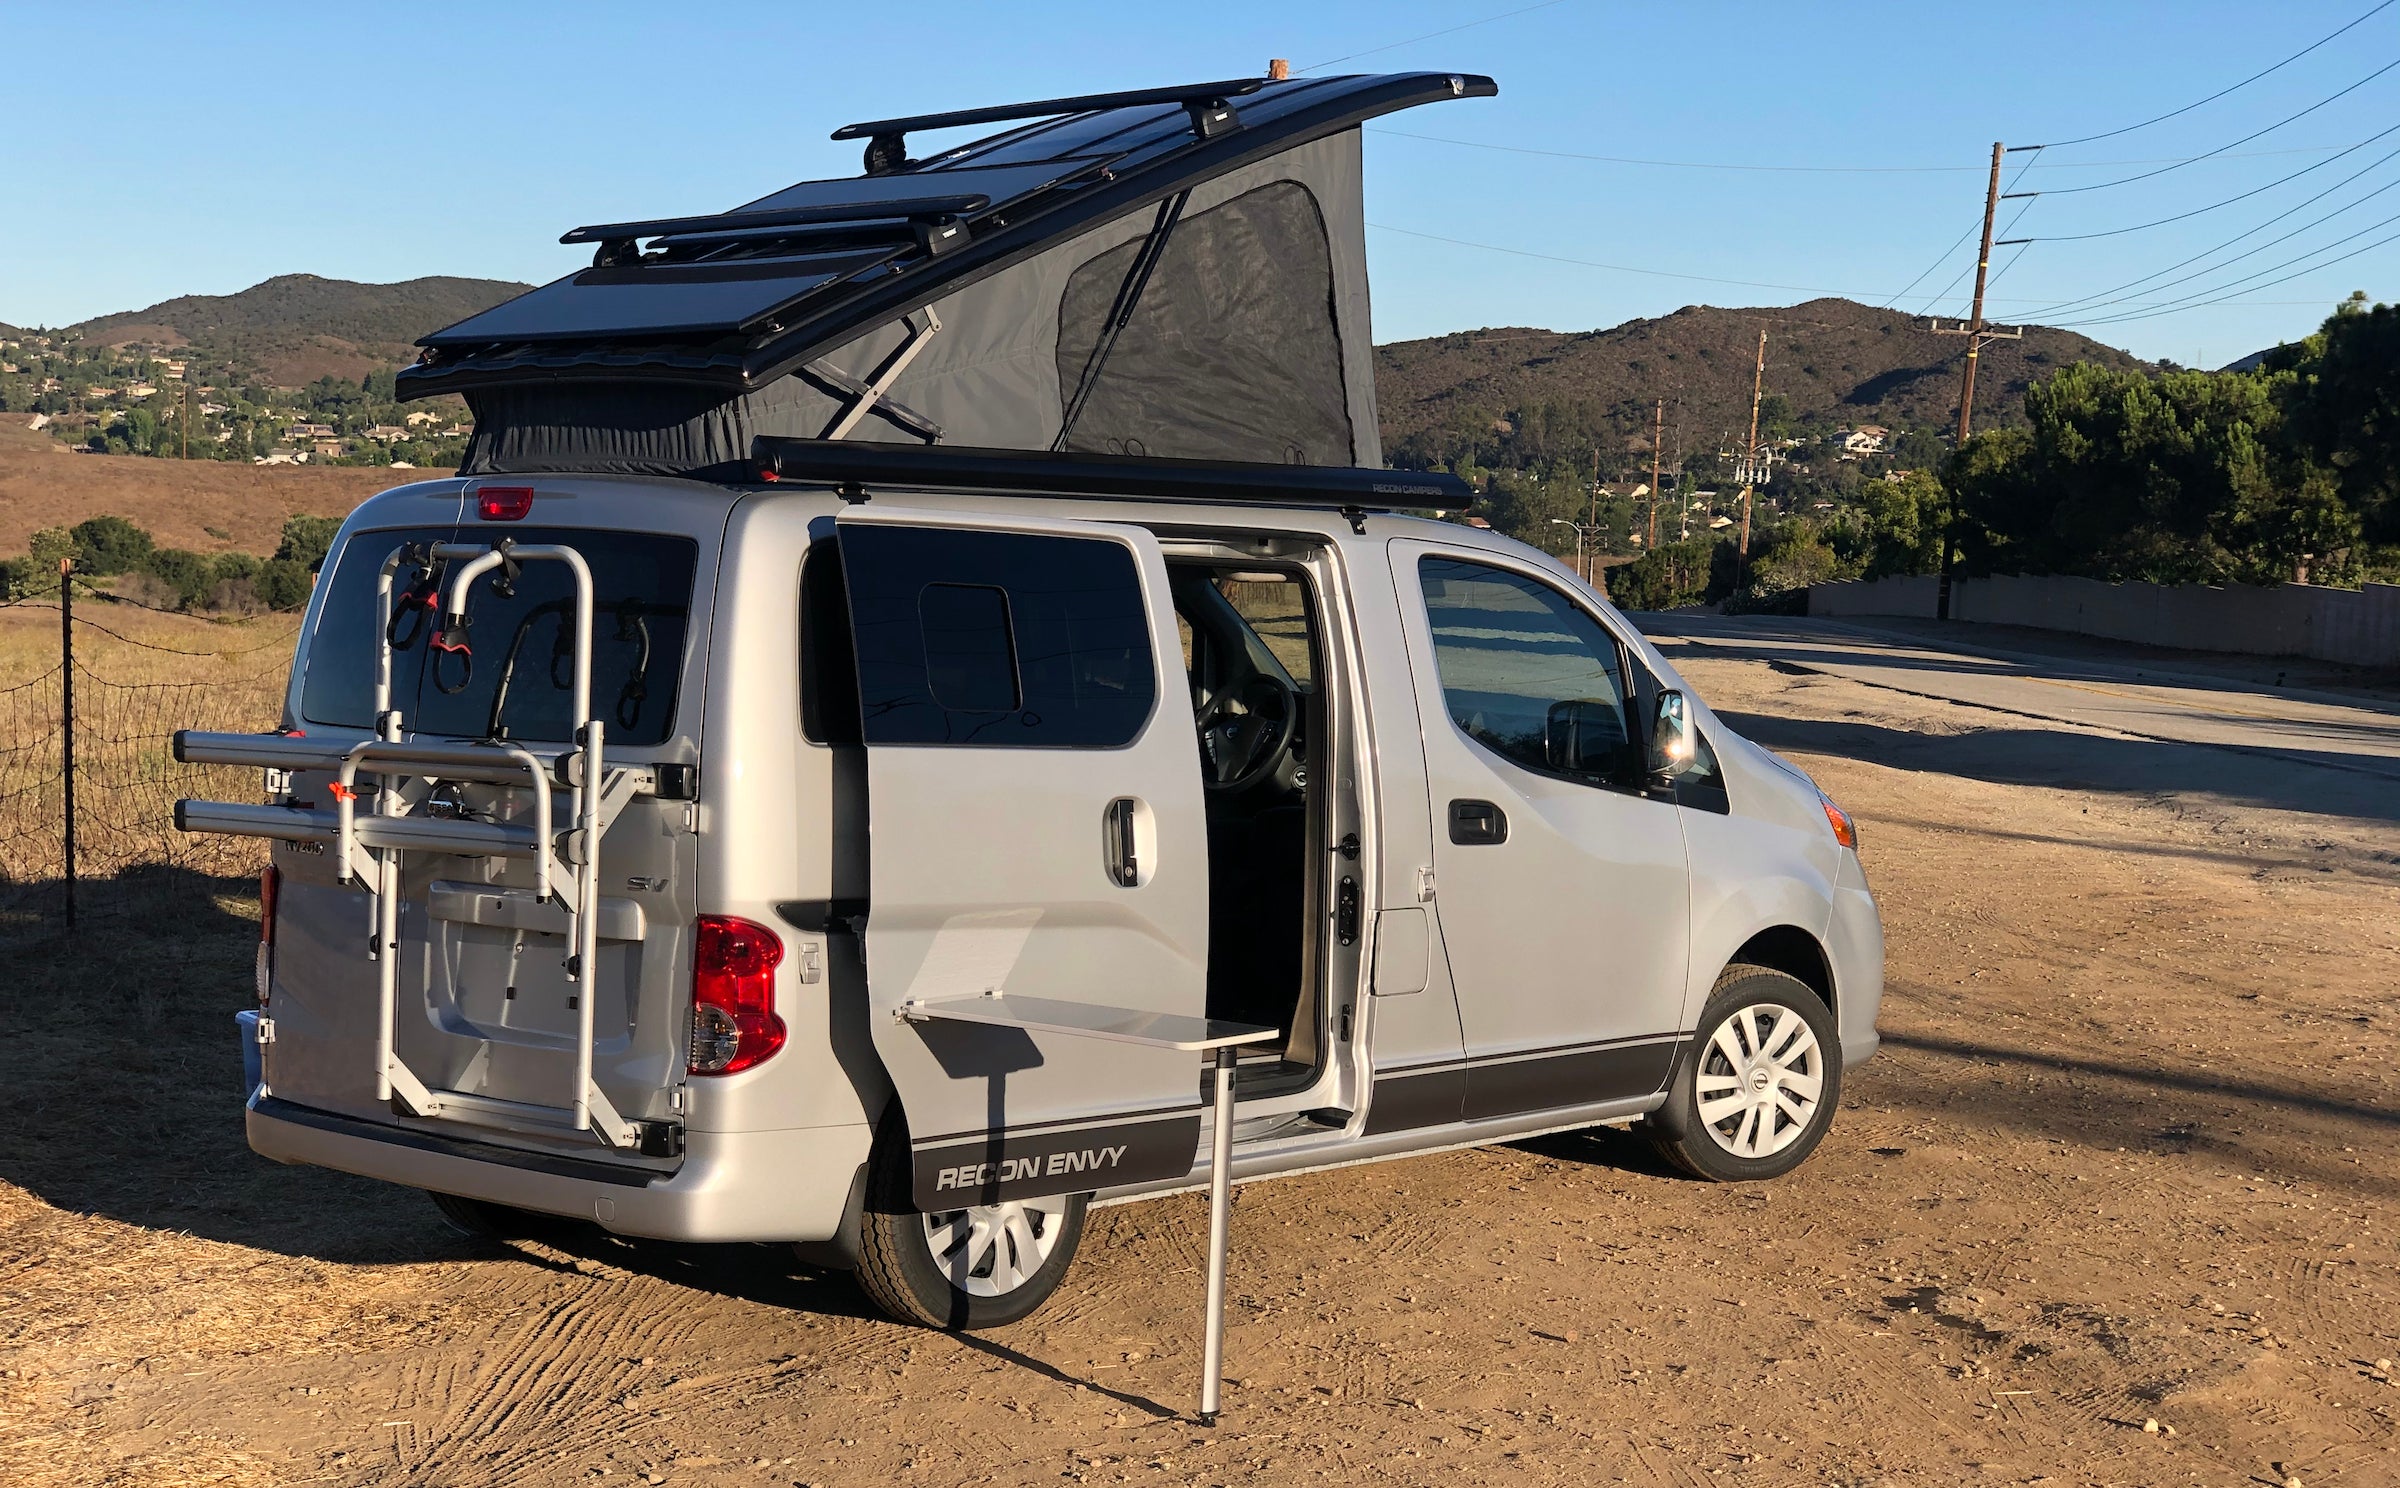 The van’s pop-up sleeper and pullout table